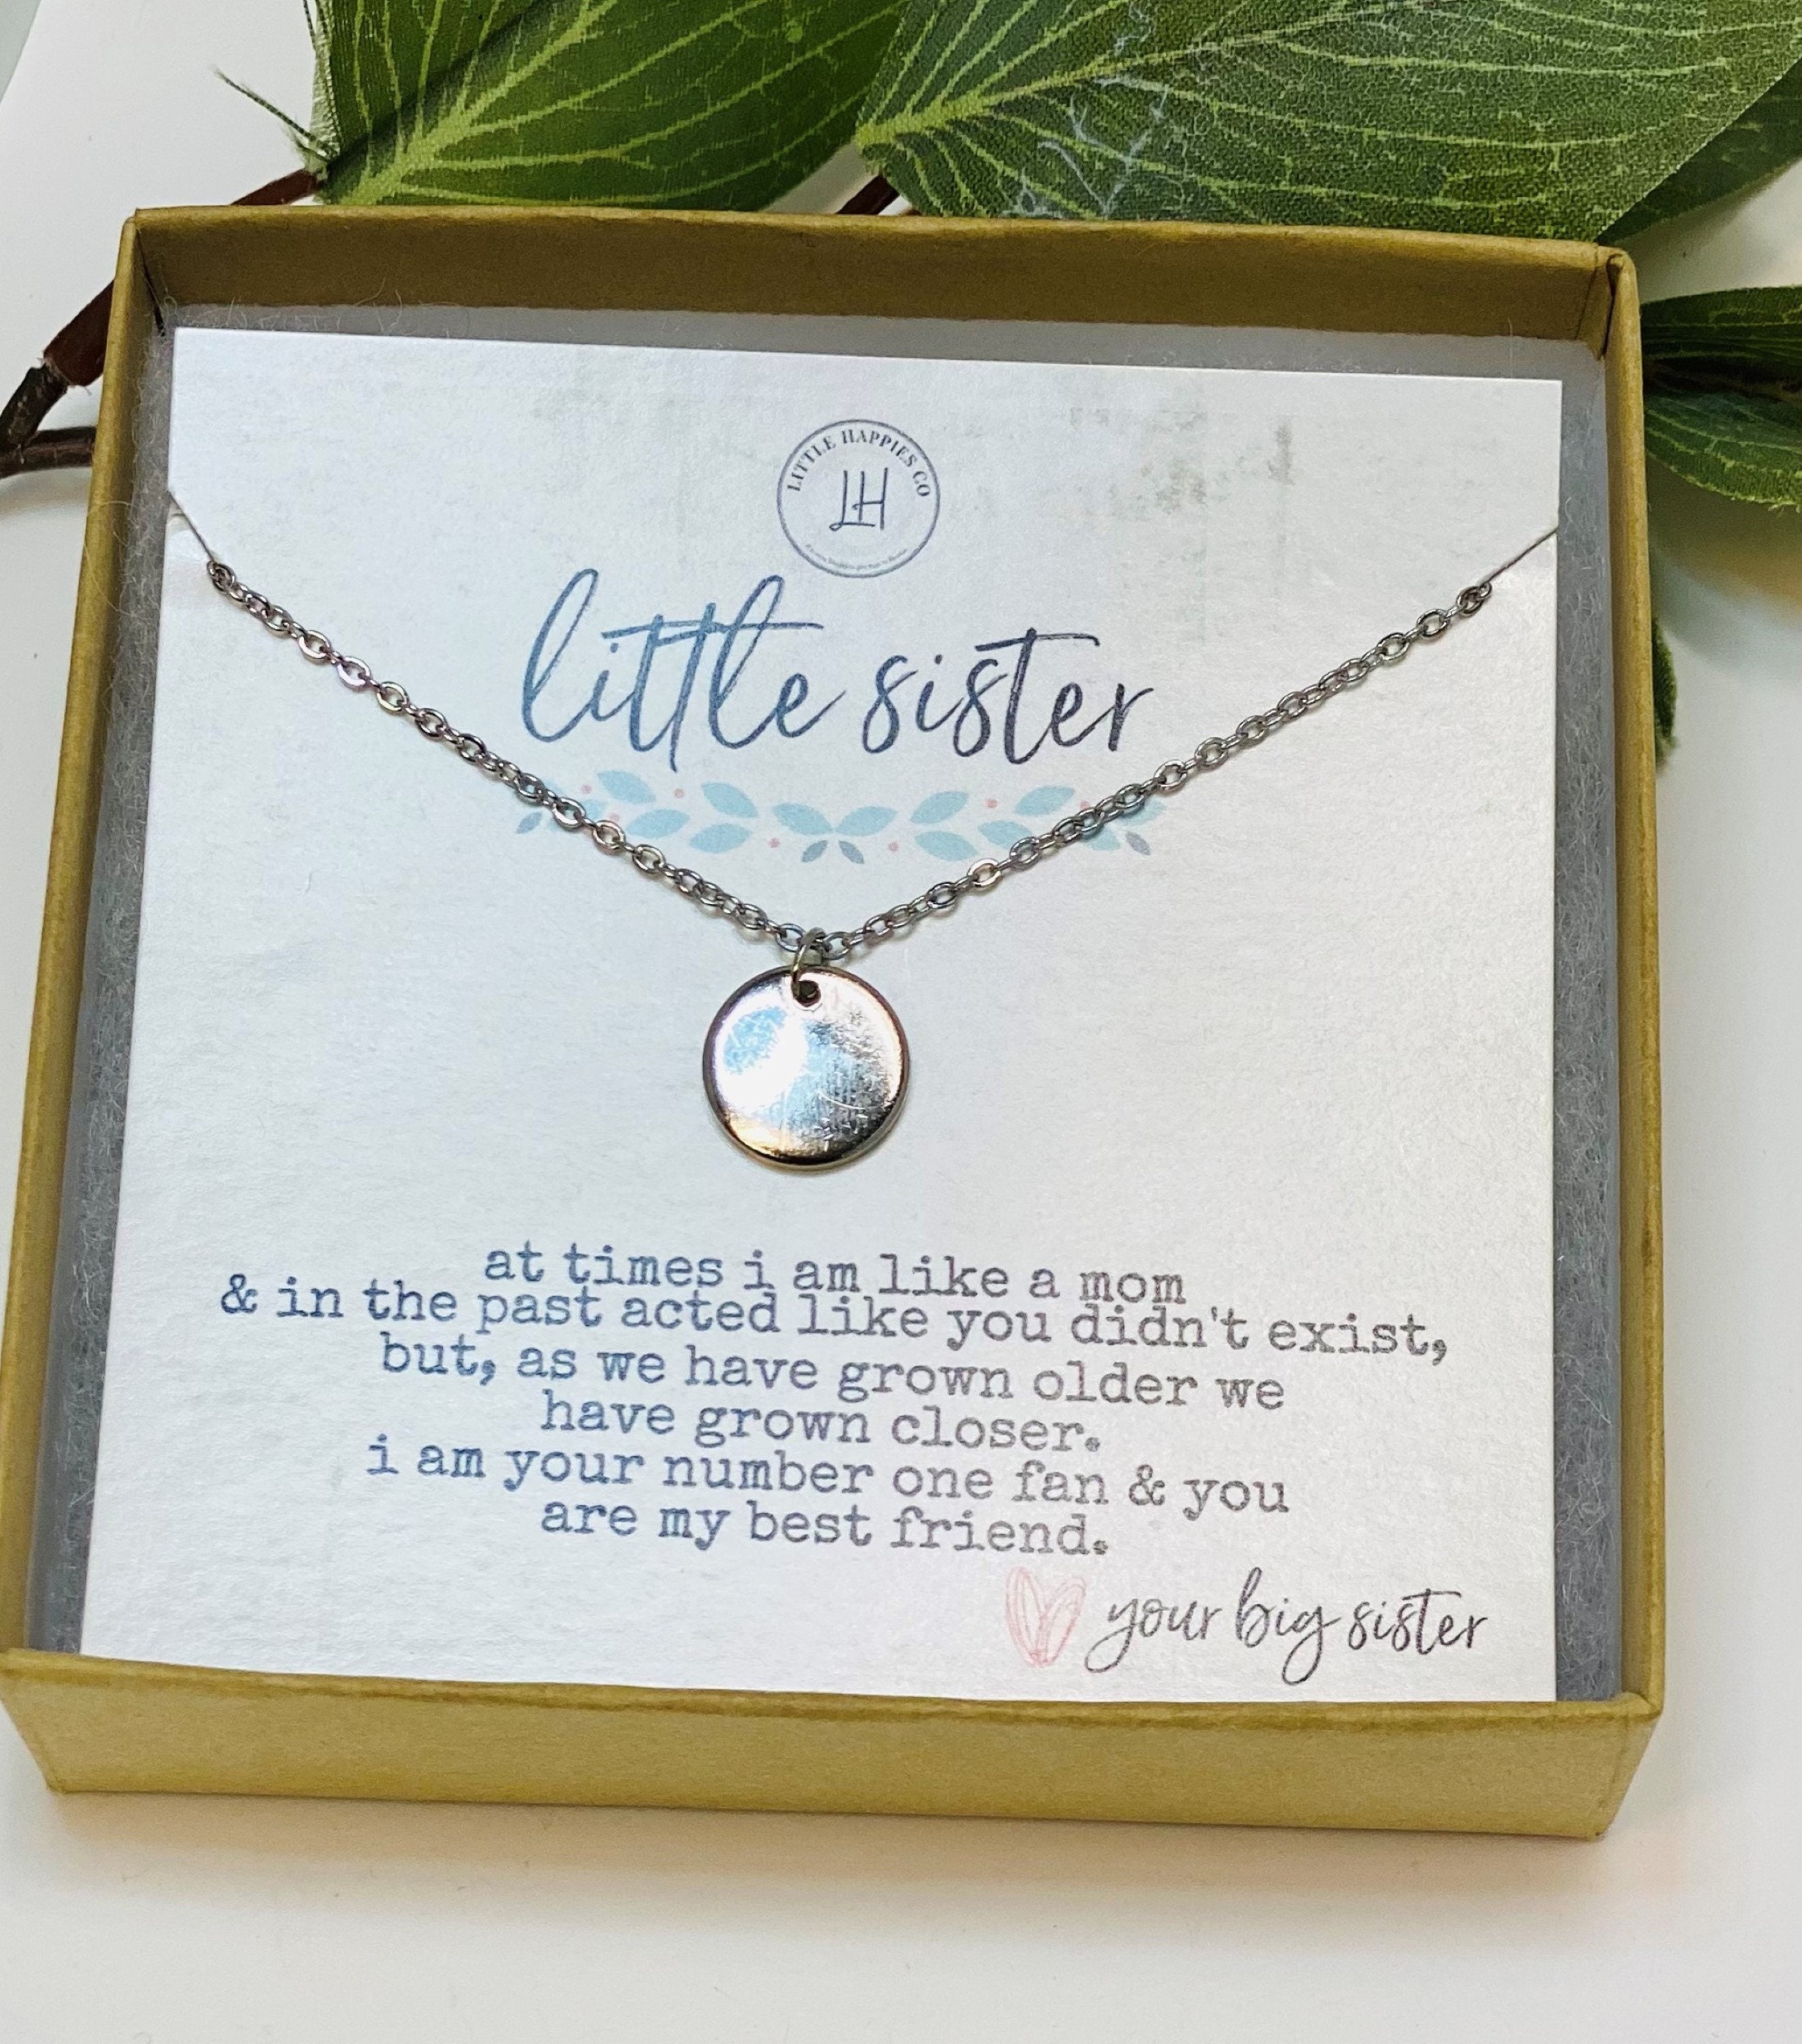 Buy TBOP Jewellery Mother's Day Gift Lil Sis Mom Big Sis Three-petal Love  Stitching Pendant Silver Chain Necklace For Women's at Amazon.in